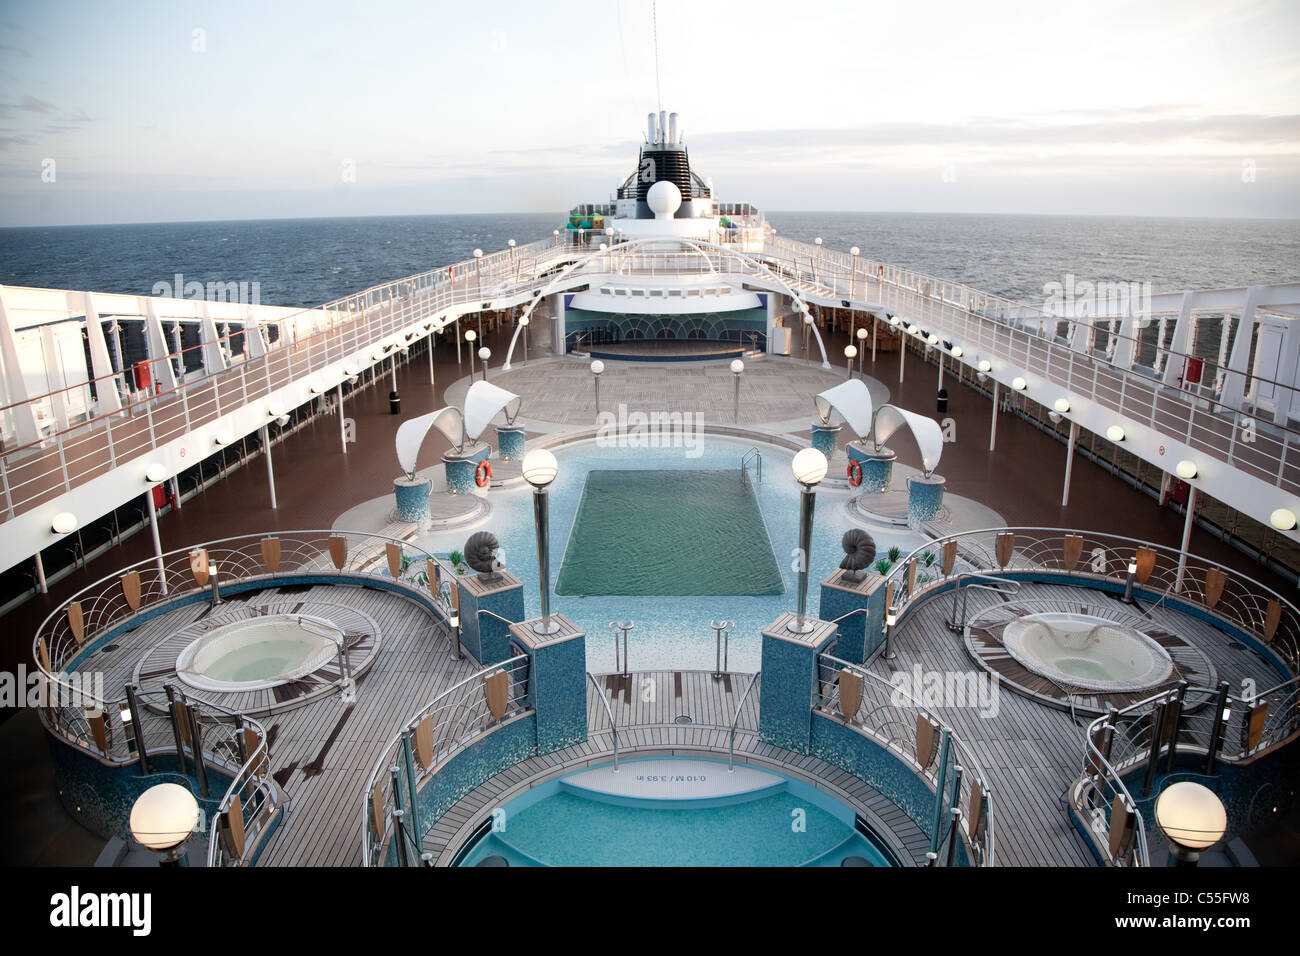 Deck of the cruise ship MSC Orchestra Stock Photo - Alamy